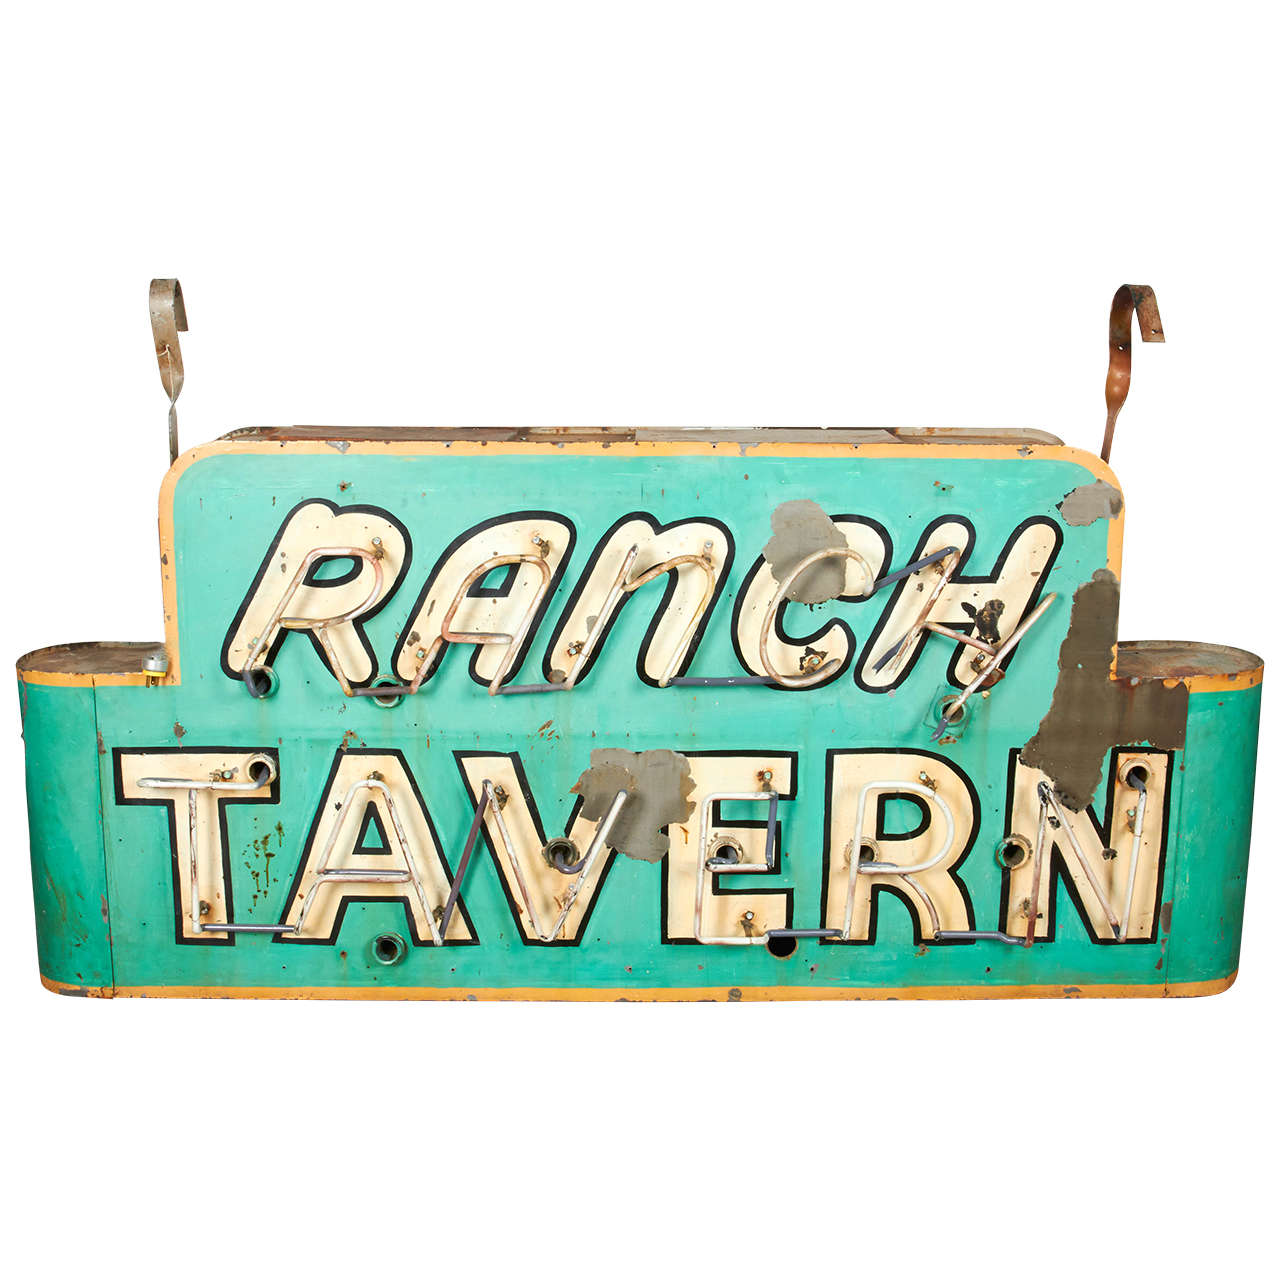 Vintage Double-Sided "Ranch Tavern" Neon Sign